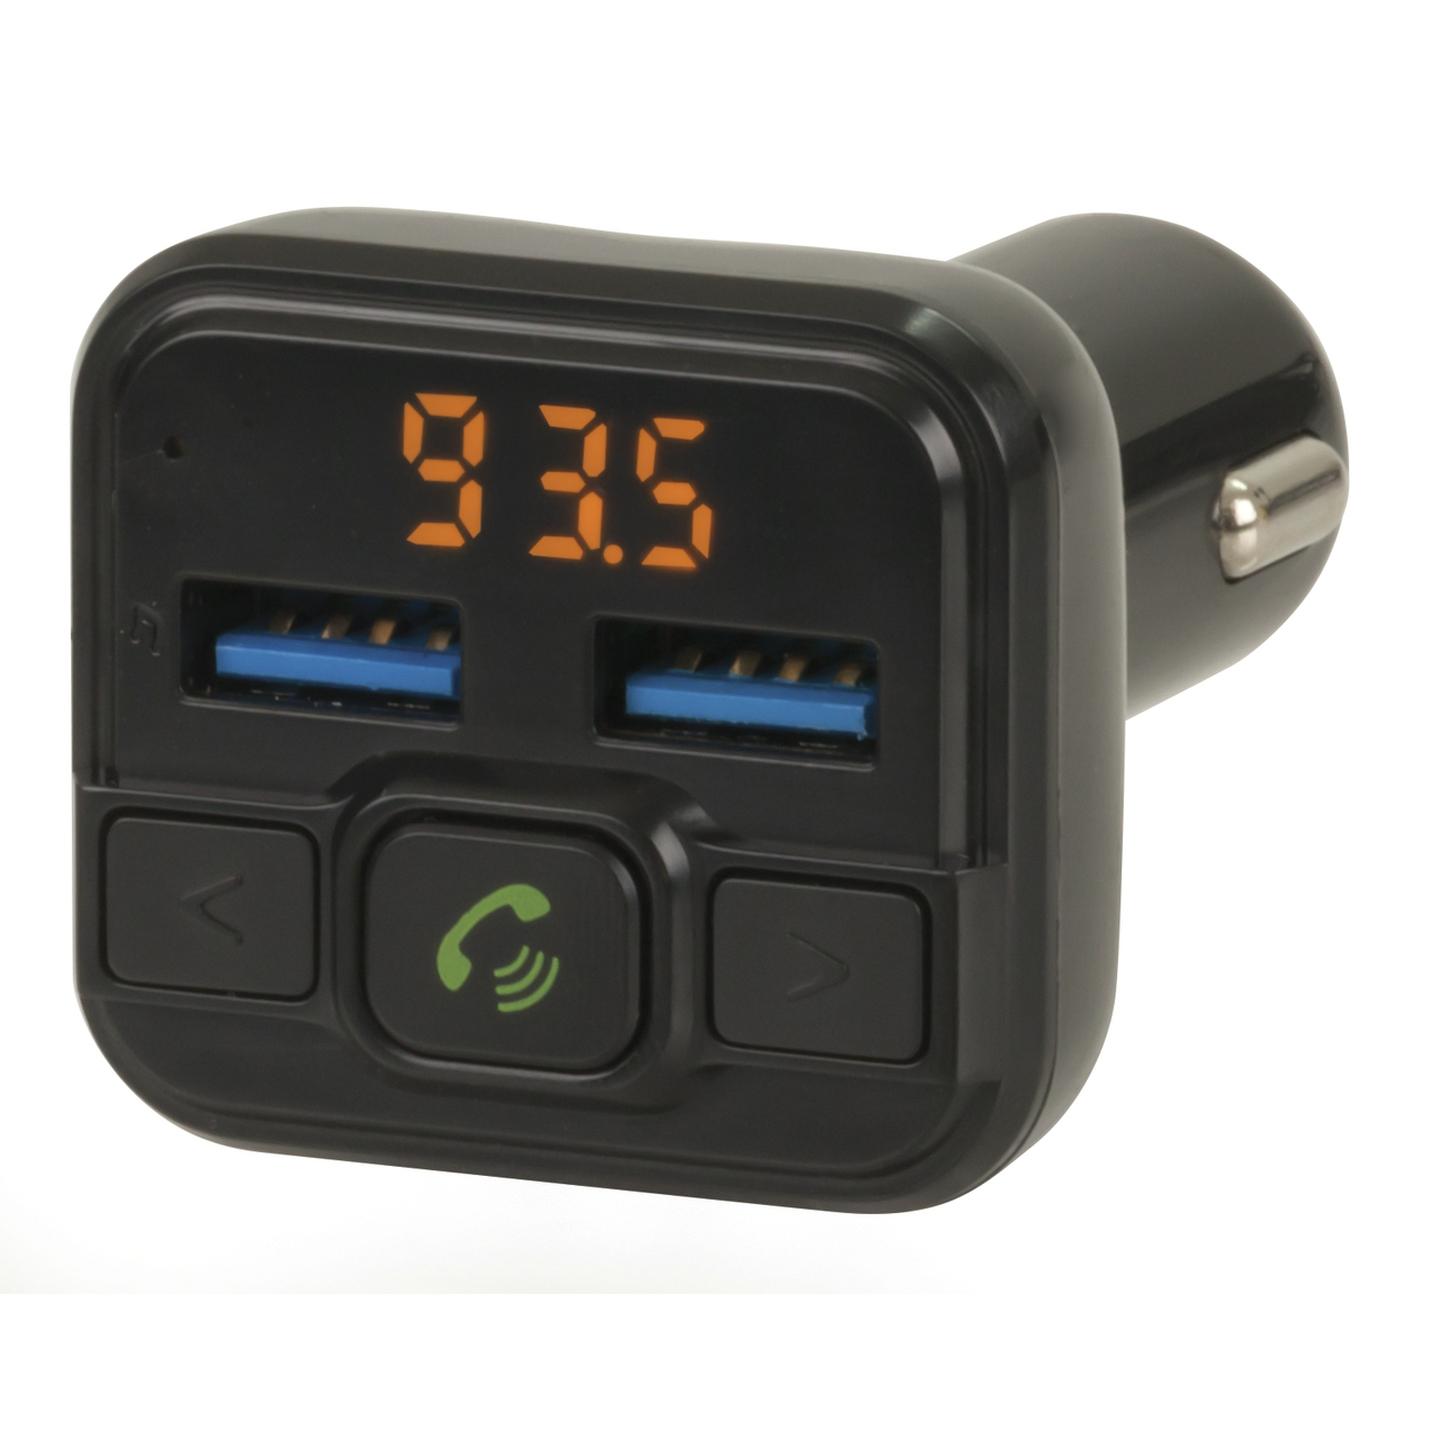 Digitech FM Transmitter with Bluetooth Technology and USB